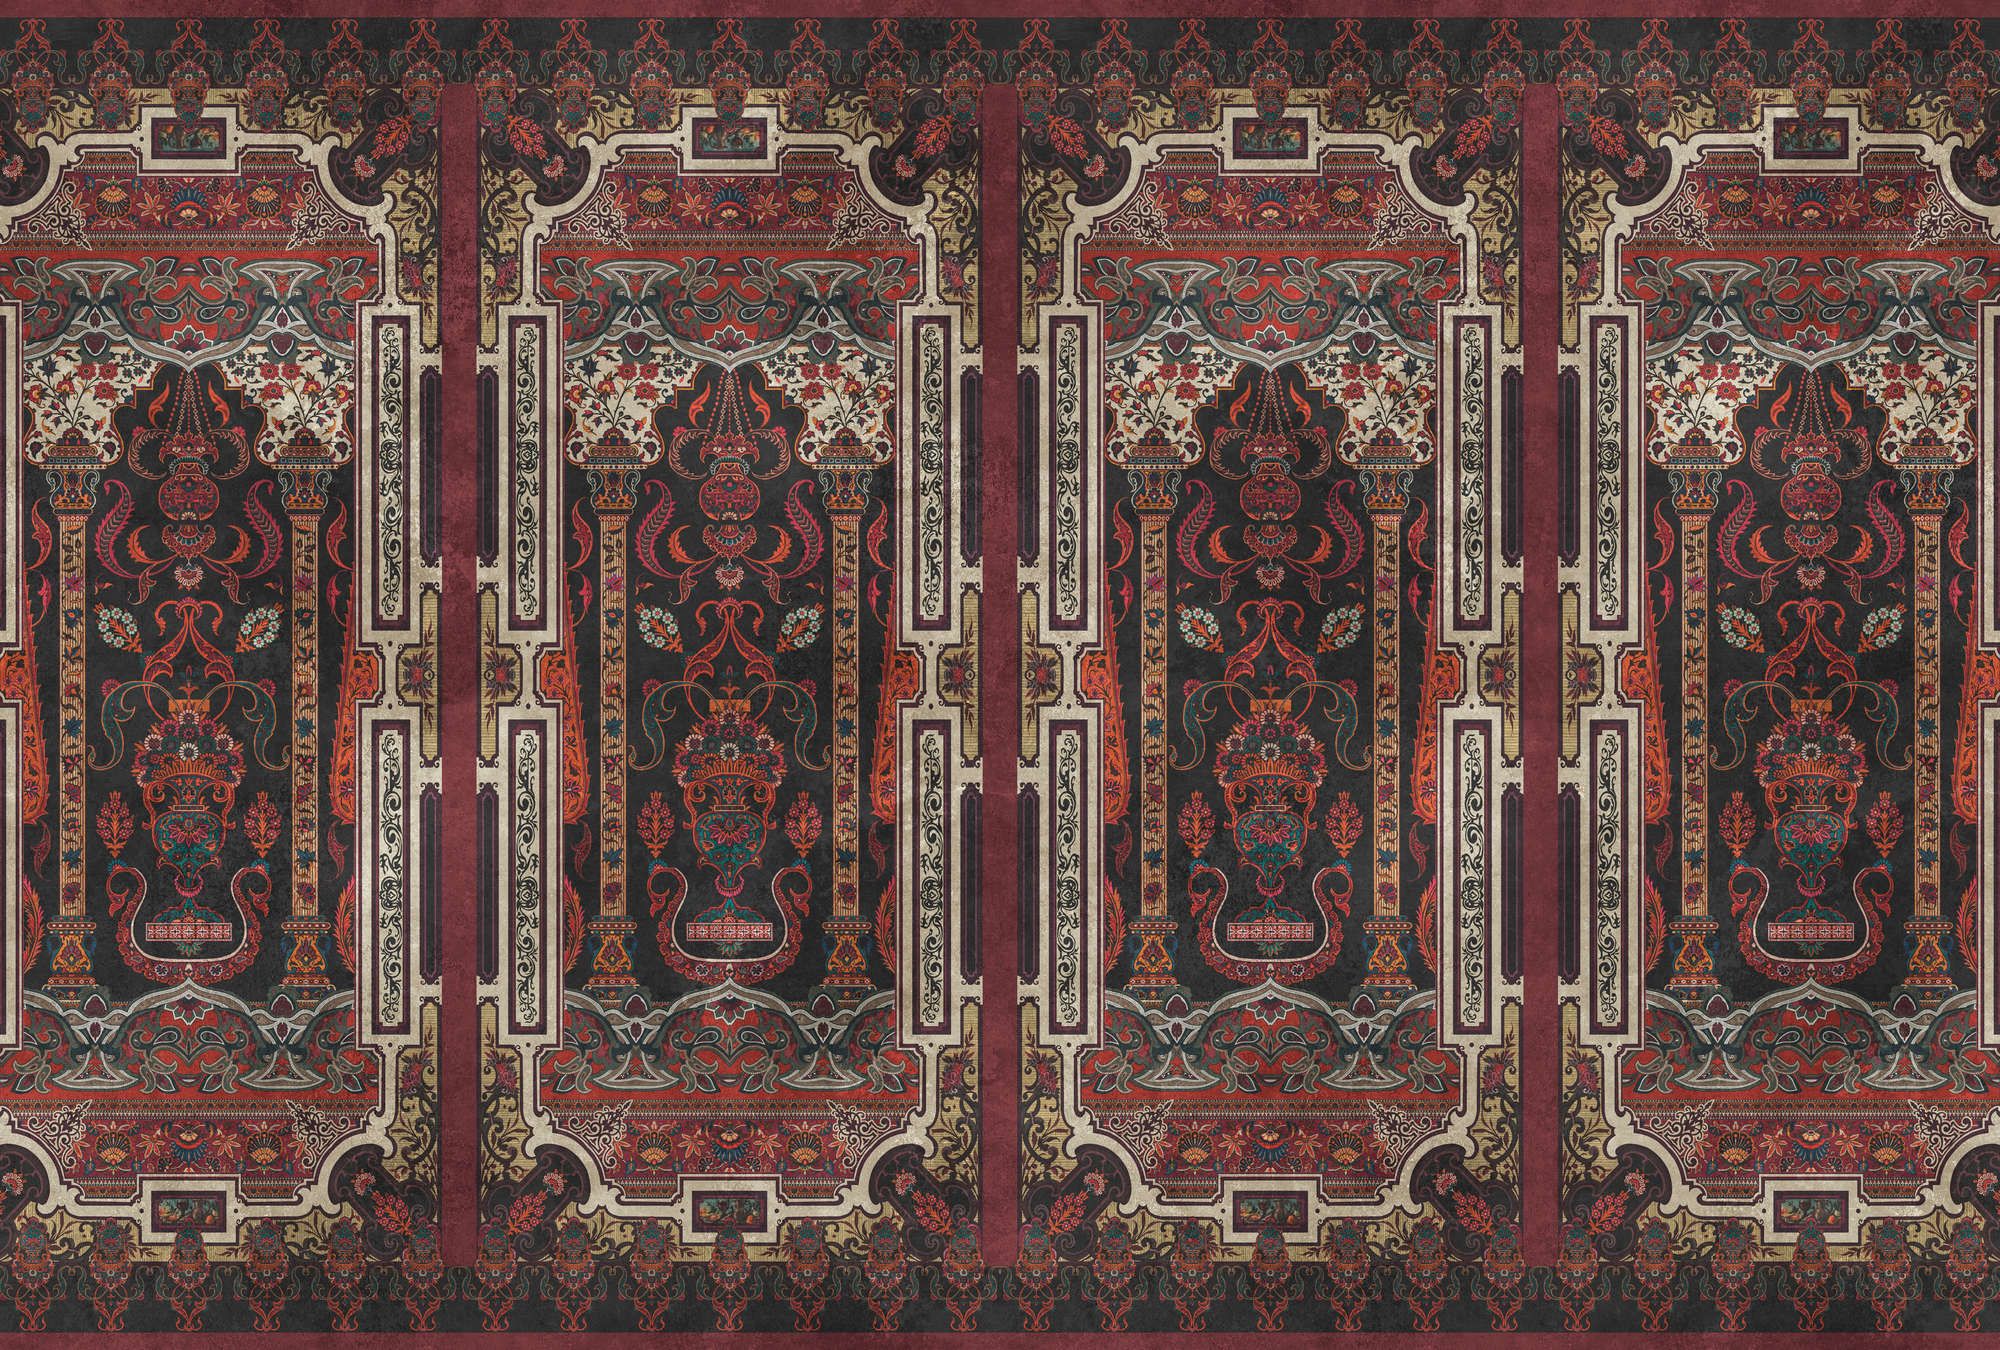             Photo wallpaper »karim« - Ornamental panelling with vintage plaster texture - Dark red | Smooth, slightly shiny premium non-woven fabric
        